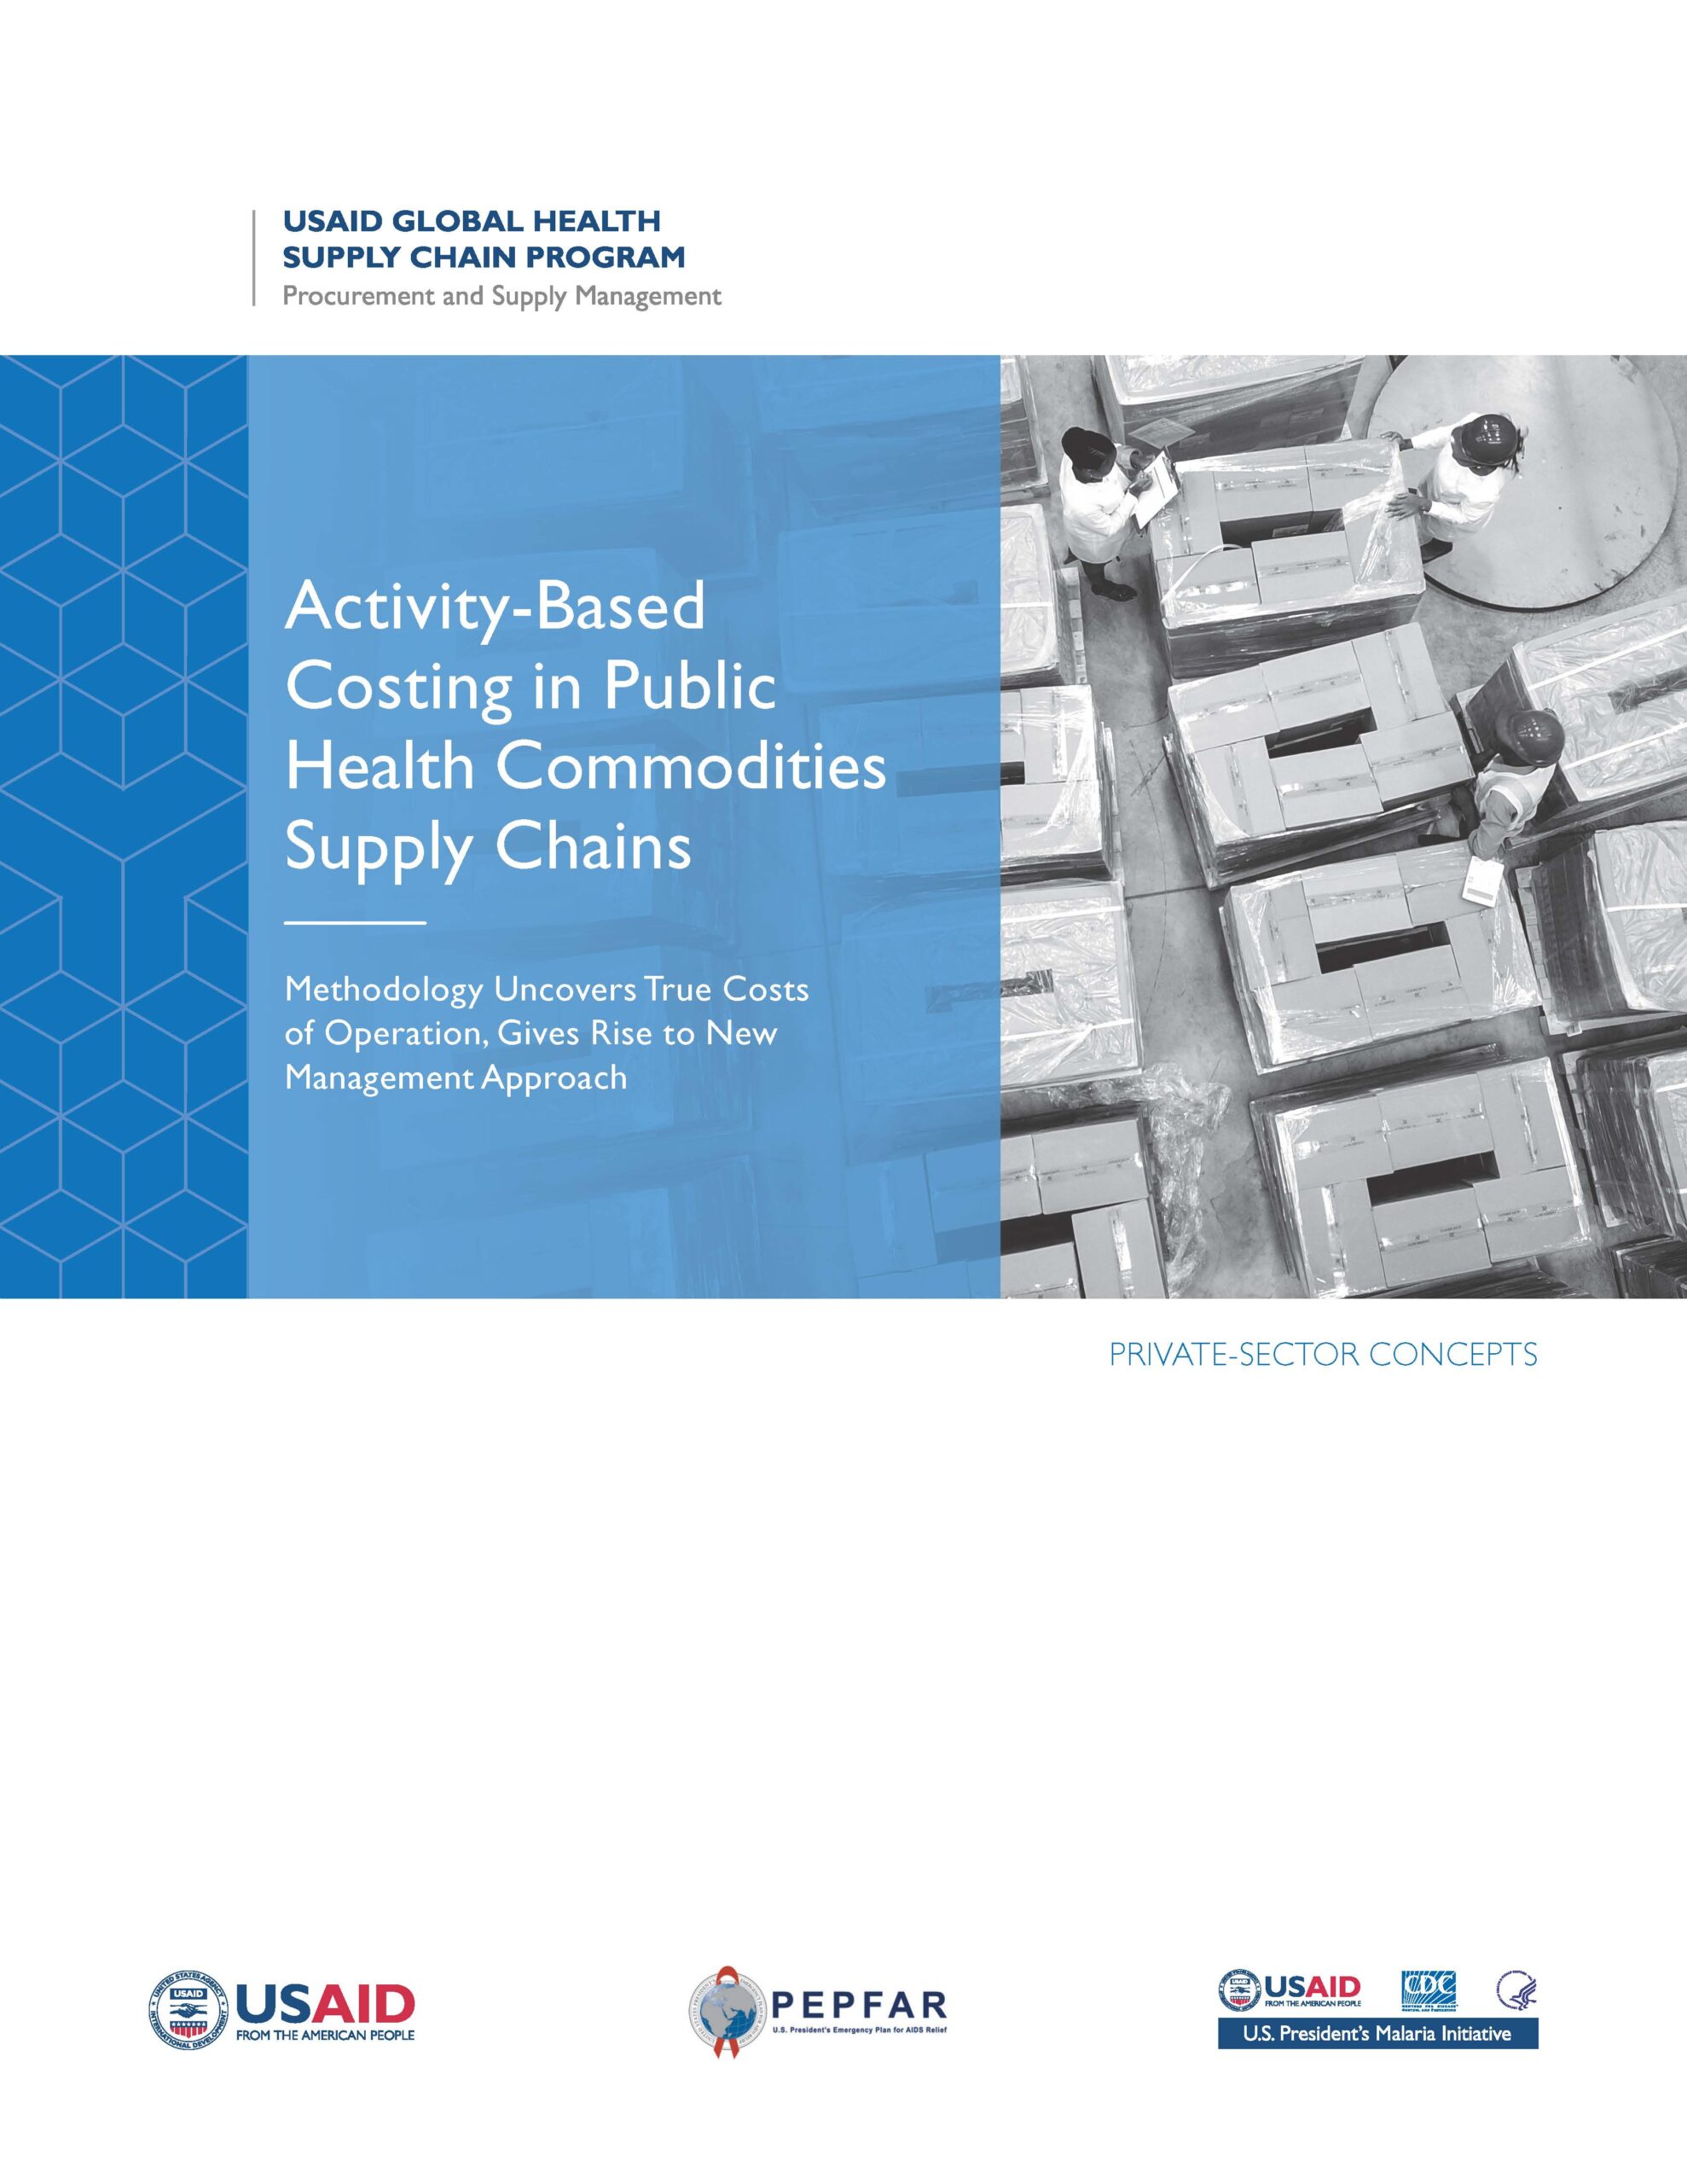 The front page of a handbook titled "Activity-Based Costing in Public Health Commodities Supply Chains." Includes an overhead image of people inspecting several pallets of boxes.